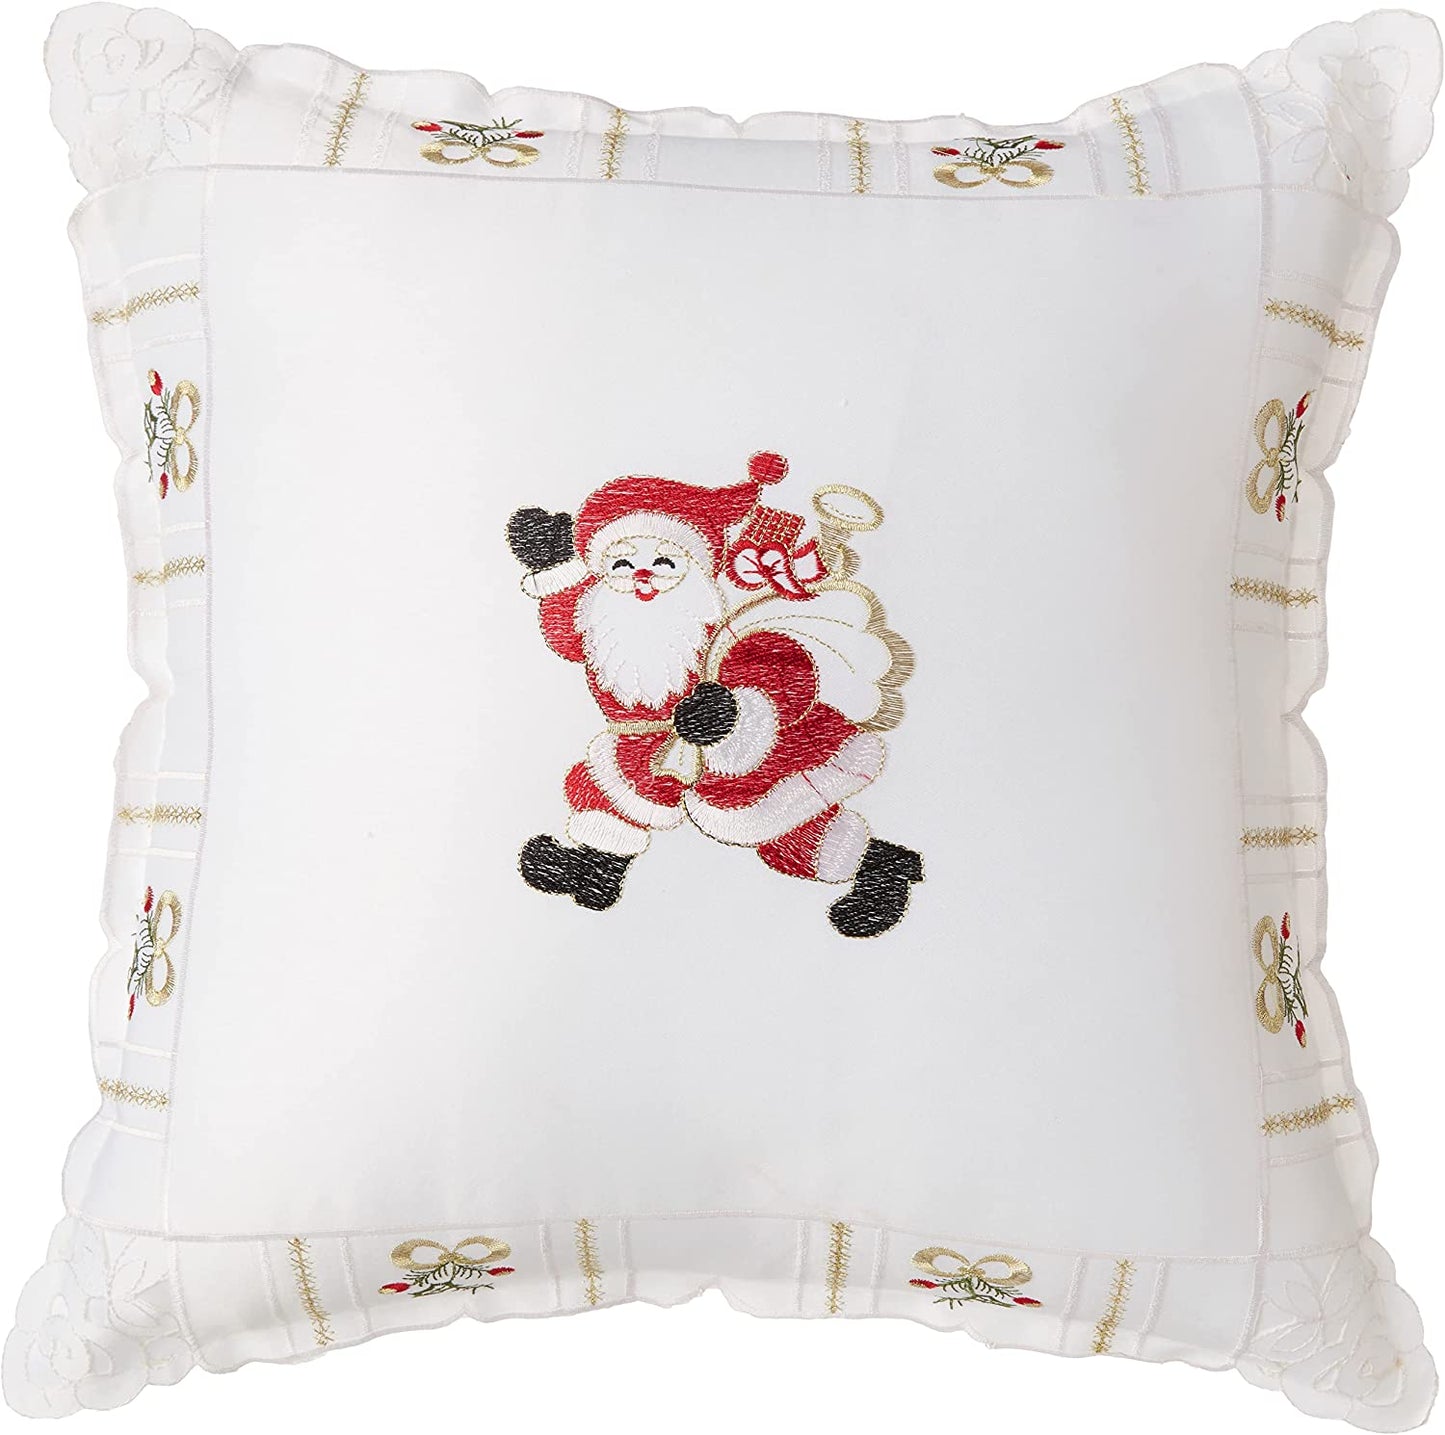 Holiday Christmas Santa Claus Holly Bows Embroidery Pattern Decorative Throw Pillow Cover